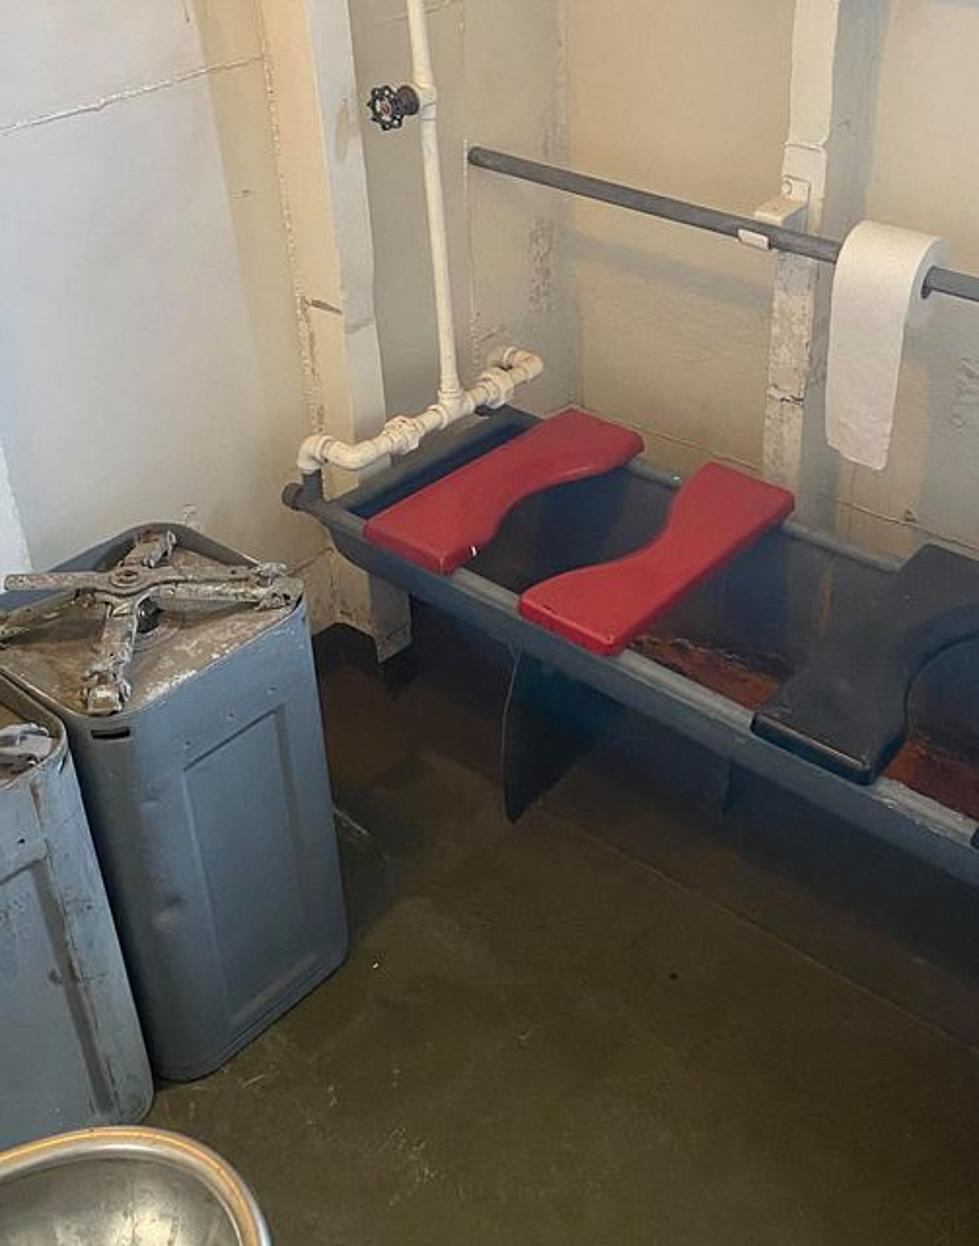 The (Unconfirmed) Dirty Secret of the ‘Red Seat’ on the USS Slater